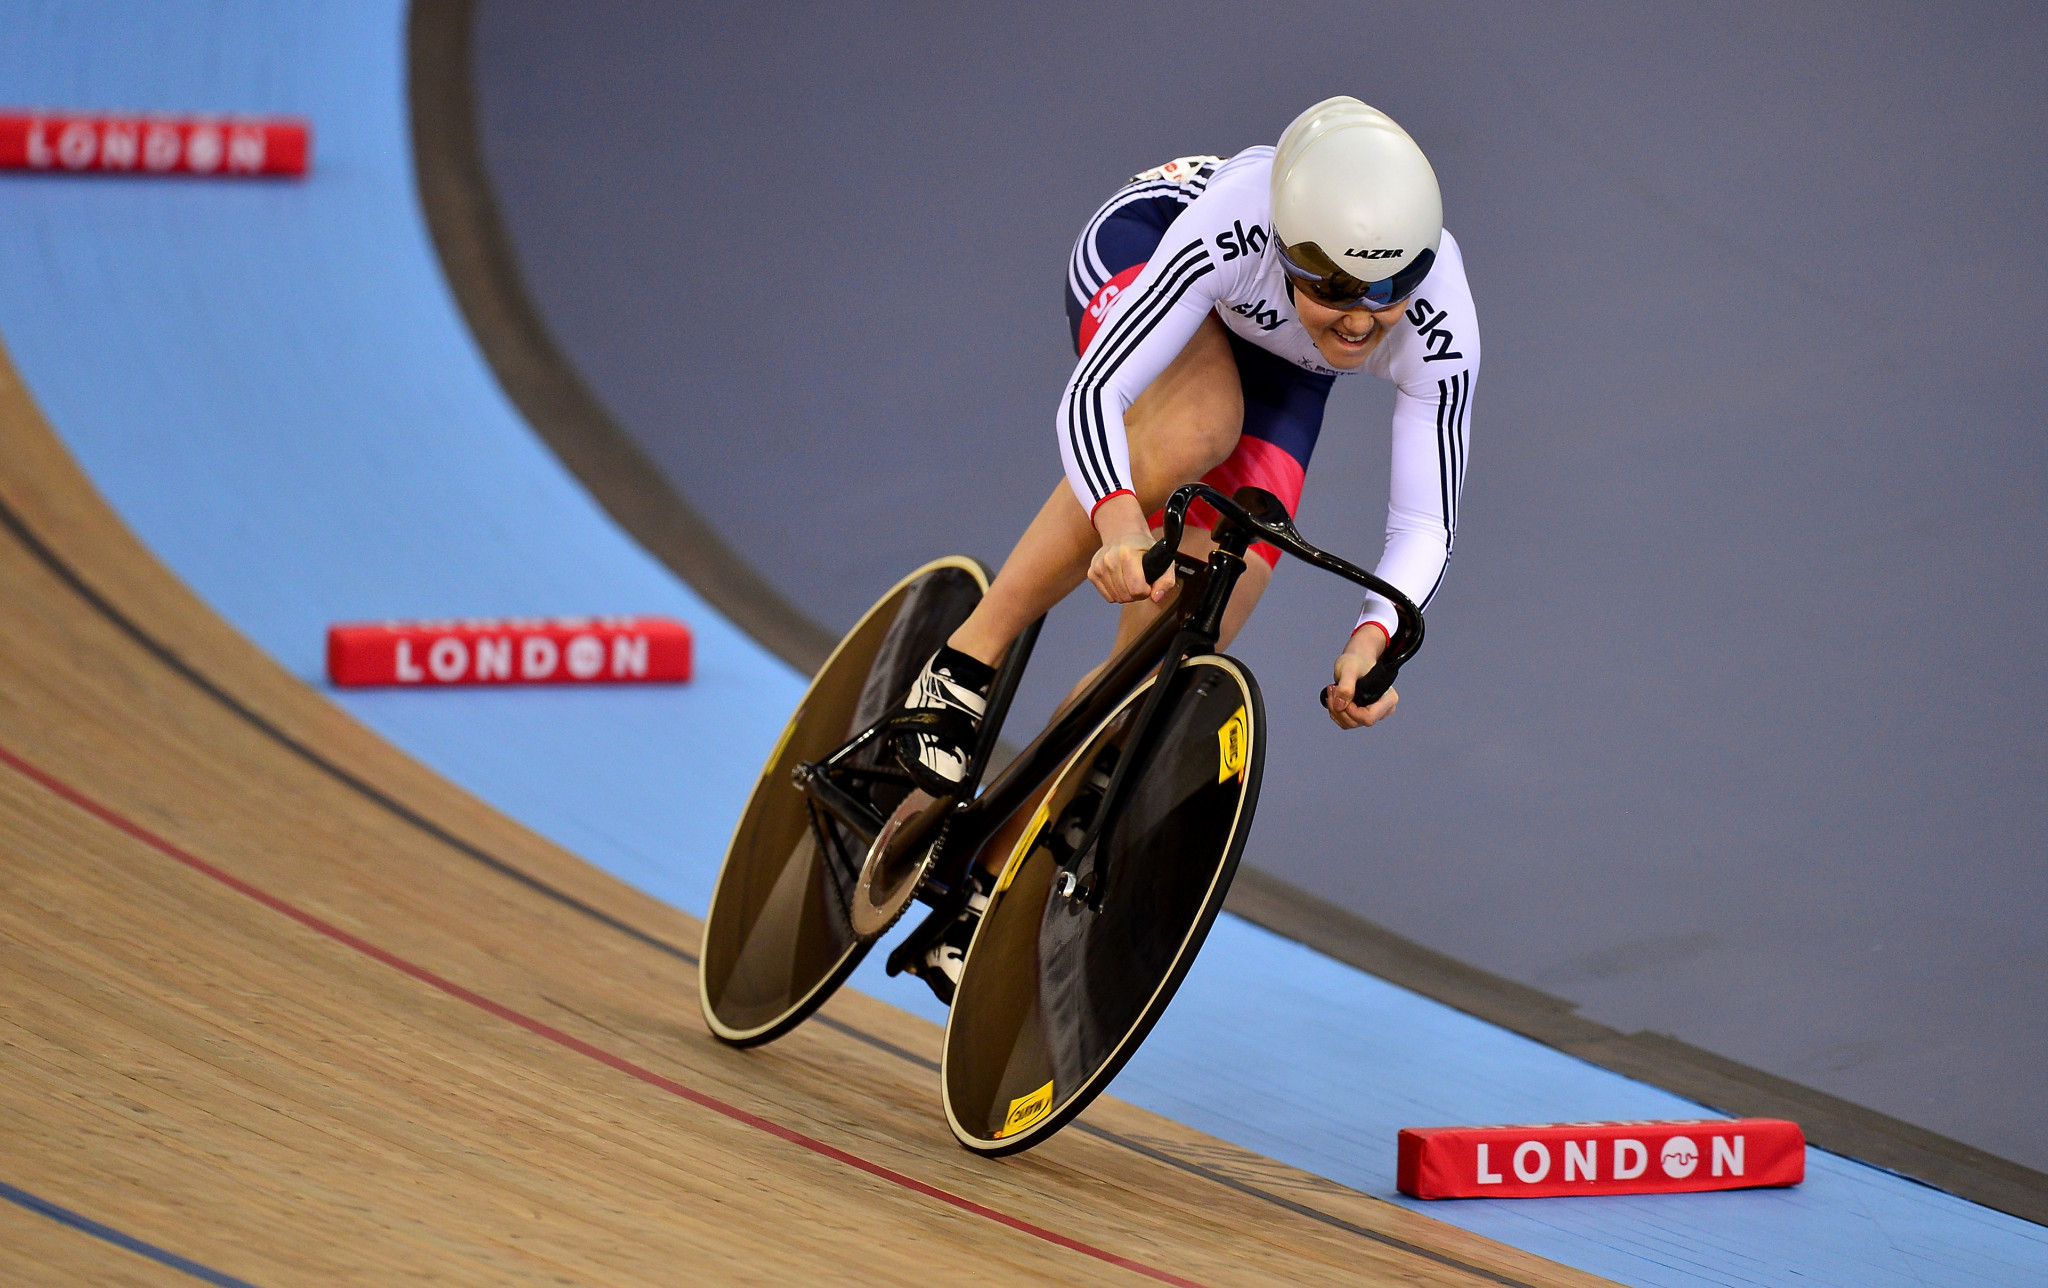 Jess Varnish is a former European team sprint champion ©Getty Images